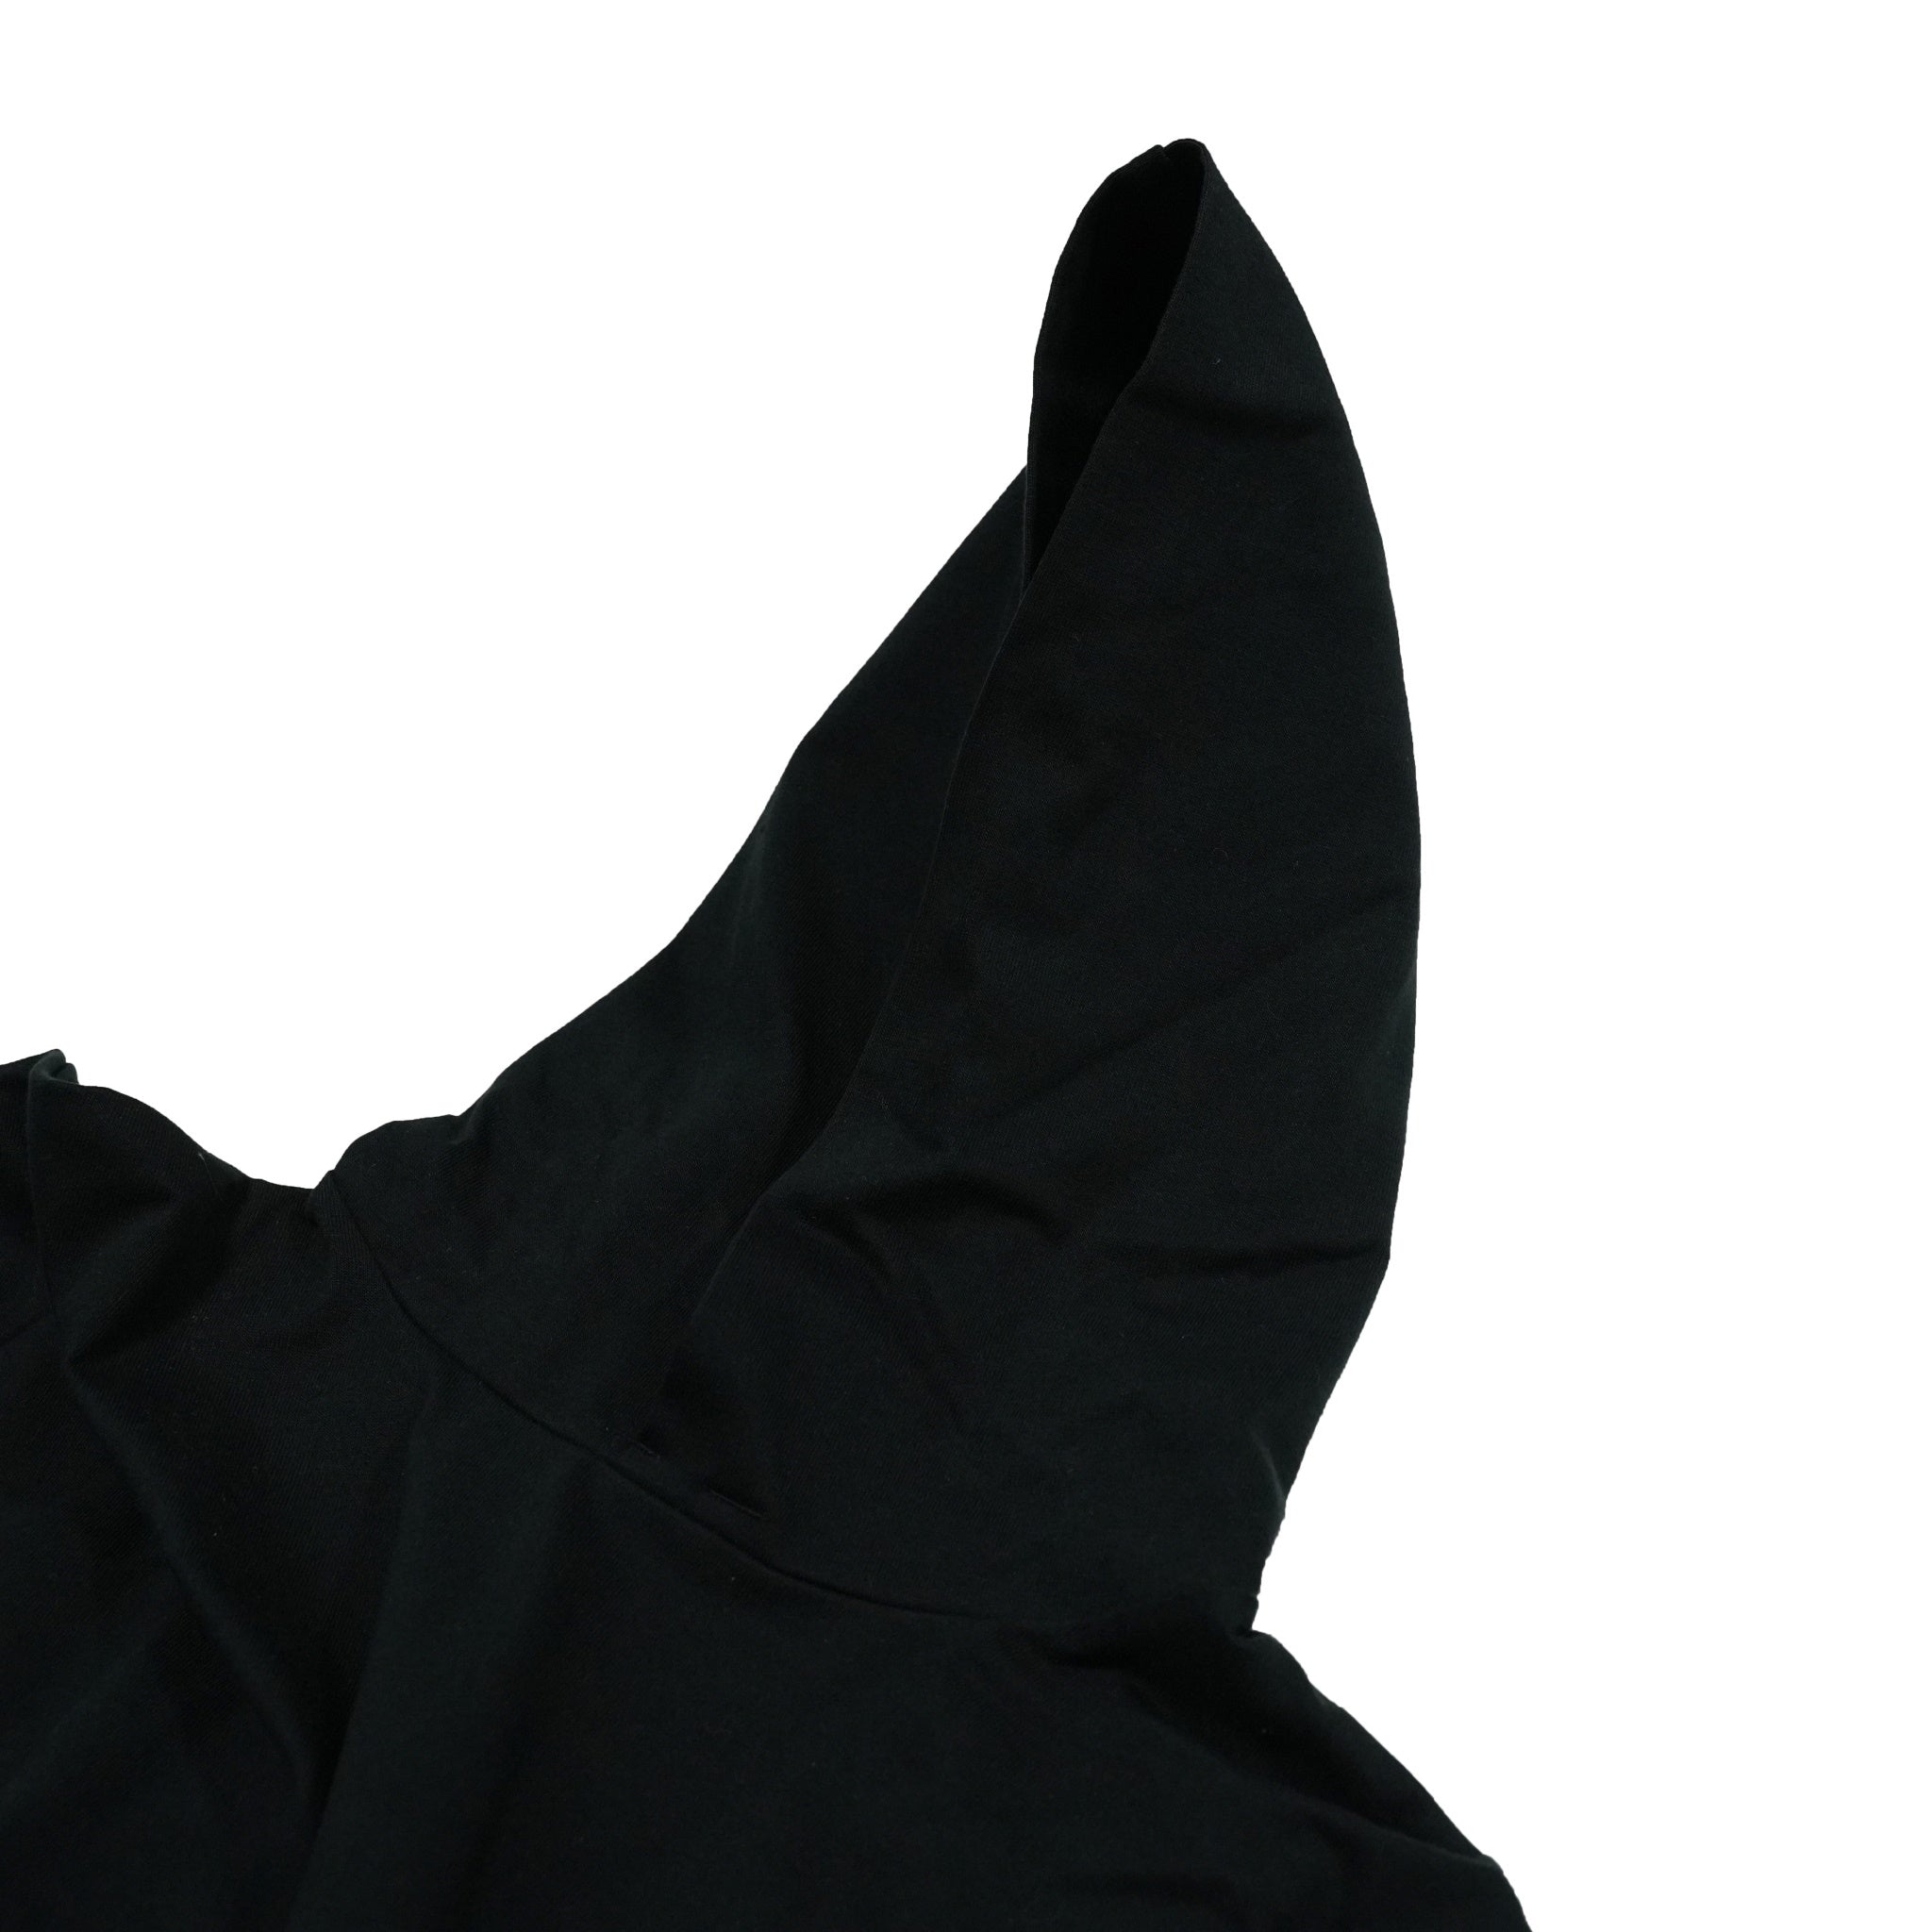 No:UN-012_AW22_B | Name:UNTRACE BASIC BOX HOODIE | Color:Black【UNTRACE_アントレース】【追跡不能】